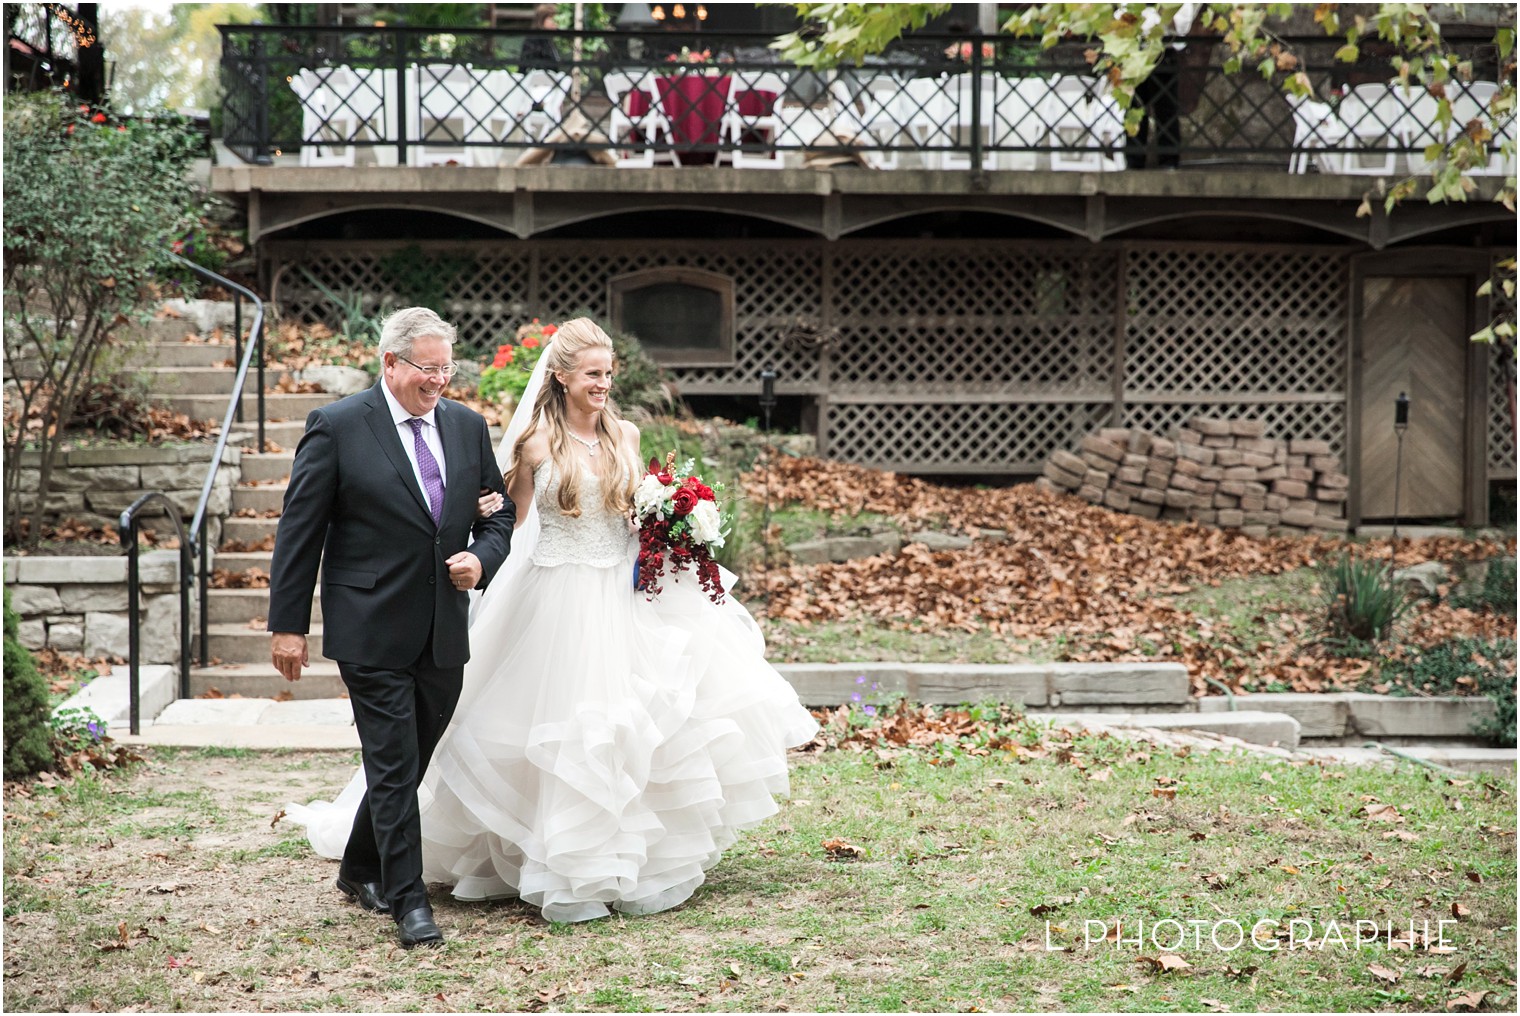 Kate Hayes,L Photographie,L Photographie weddings,Lalumondiere,Lalumondiere Mill and Rivergarden,October wedding,Saint Louis wedding photographer,Saint Louis wedding photography,burgundy wedding,fall wedding,first look,outdoor wedding,